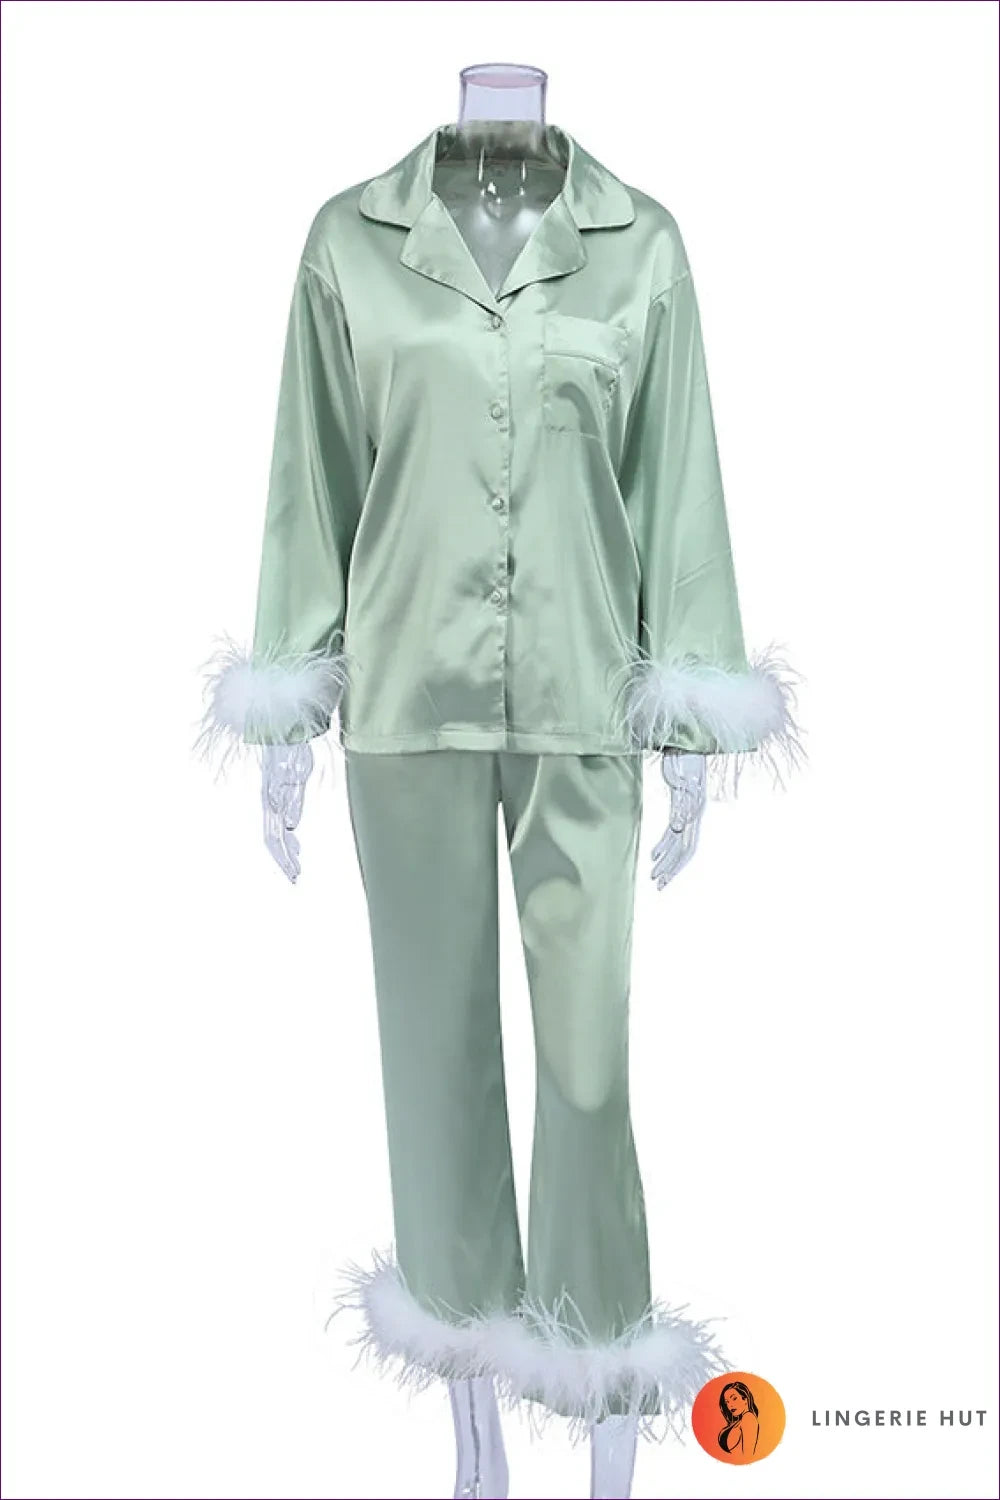 Indulge In Ultimate Comfort With Our Long Sleeve Pyjama Set. Featuring a Cute v Neck, Delicate Feather Trim,